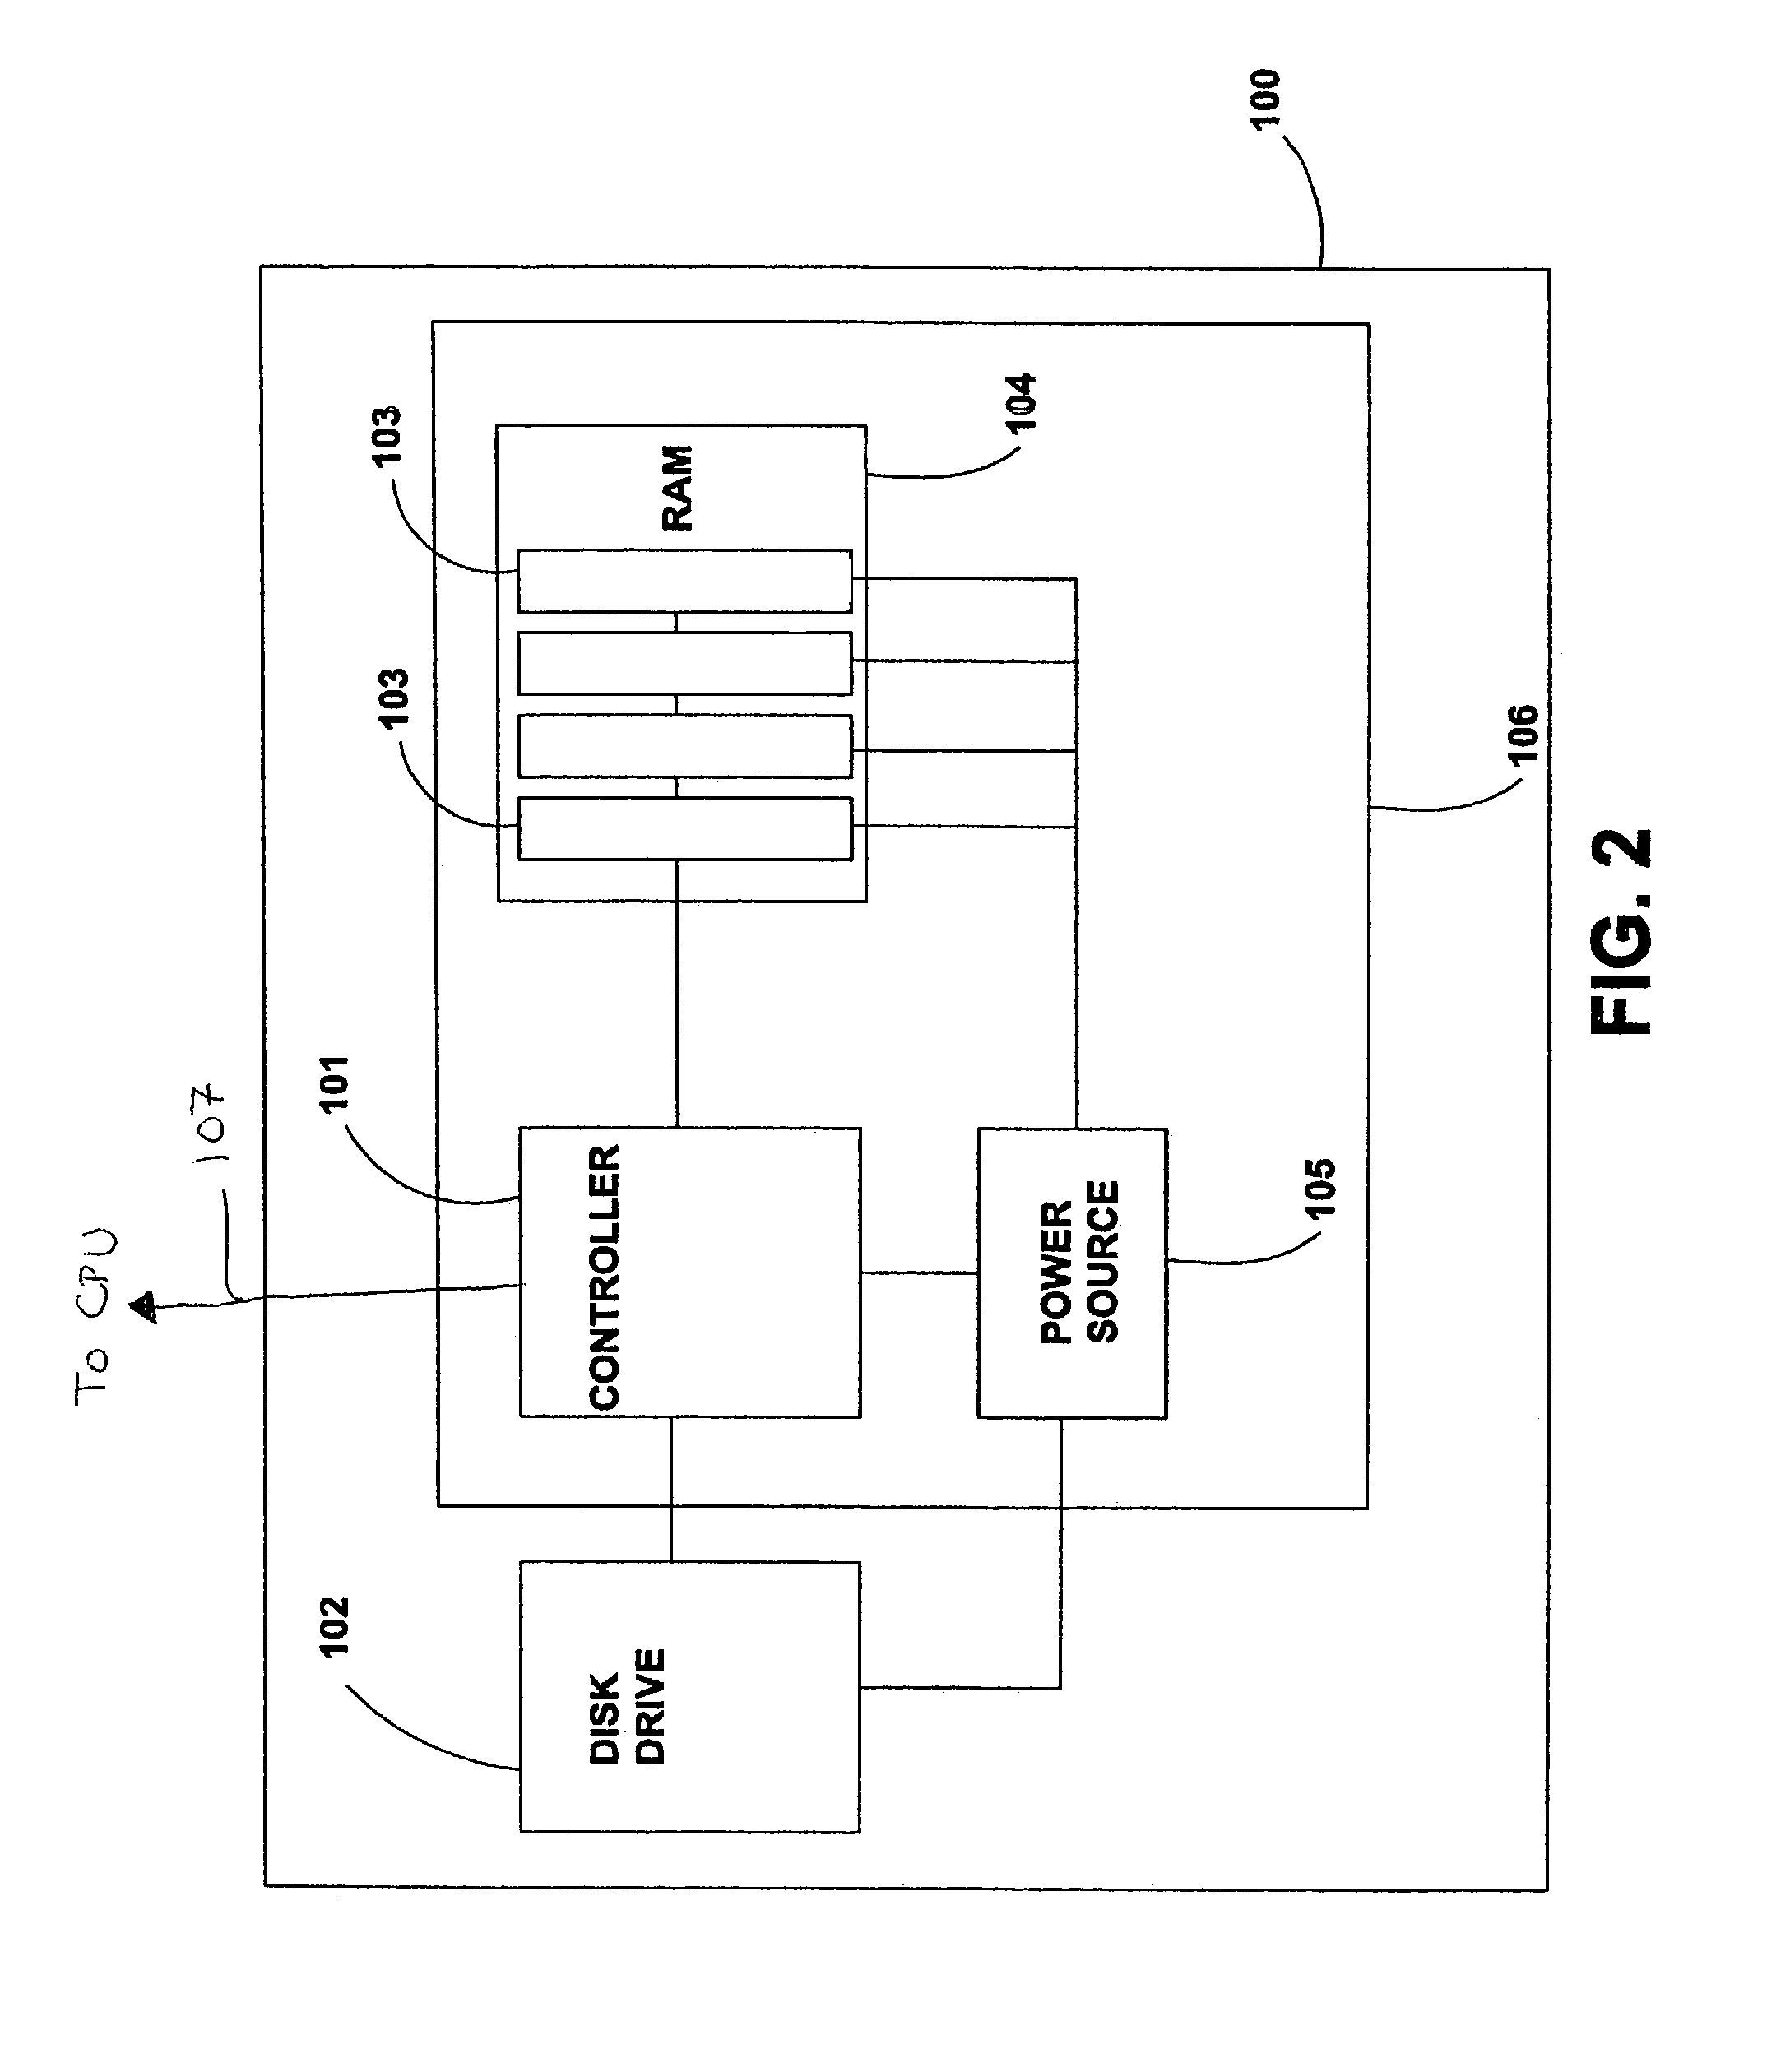 Storage controller with the disk drive and the RAM in a hybrid architecture